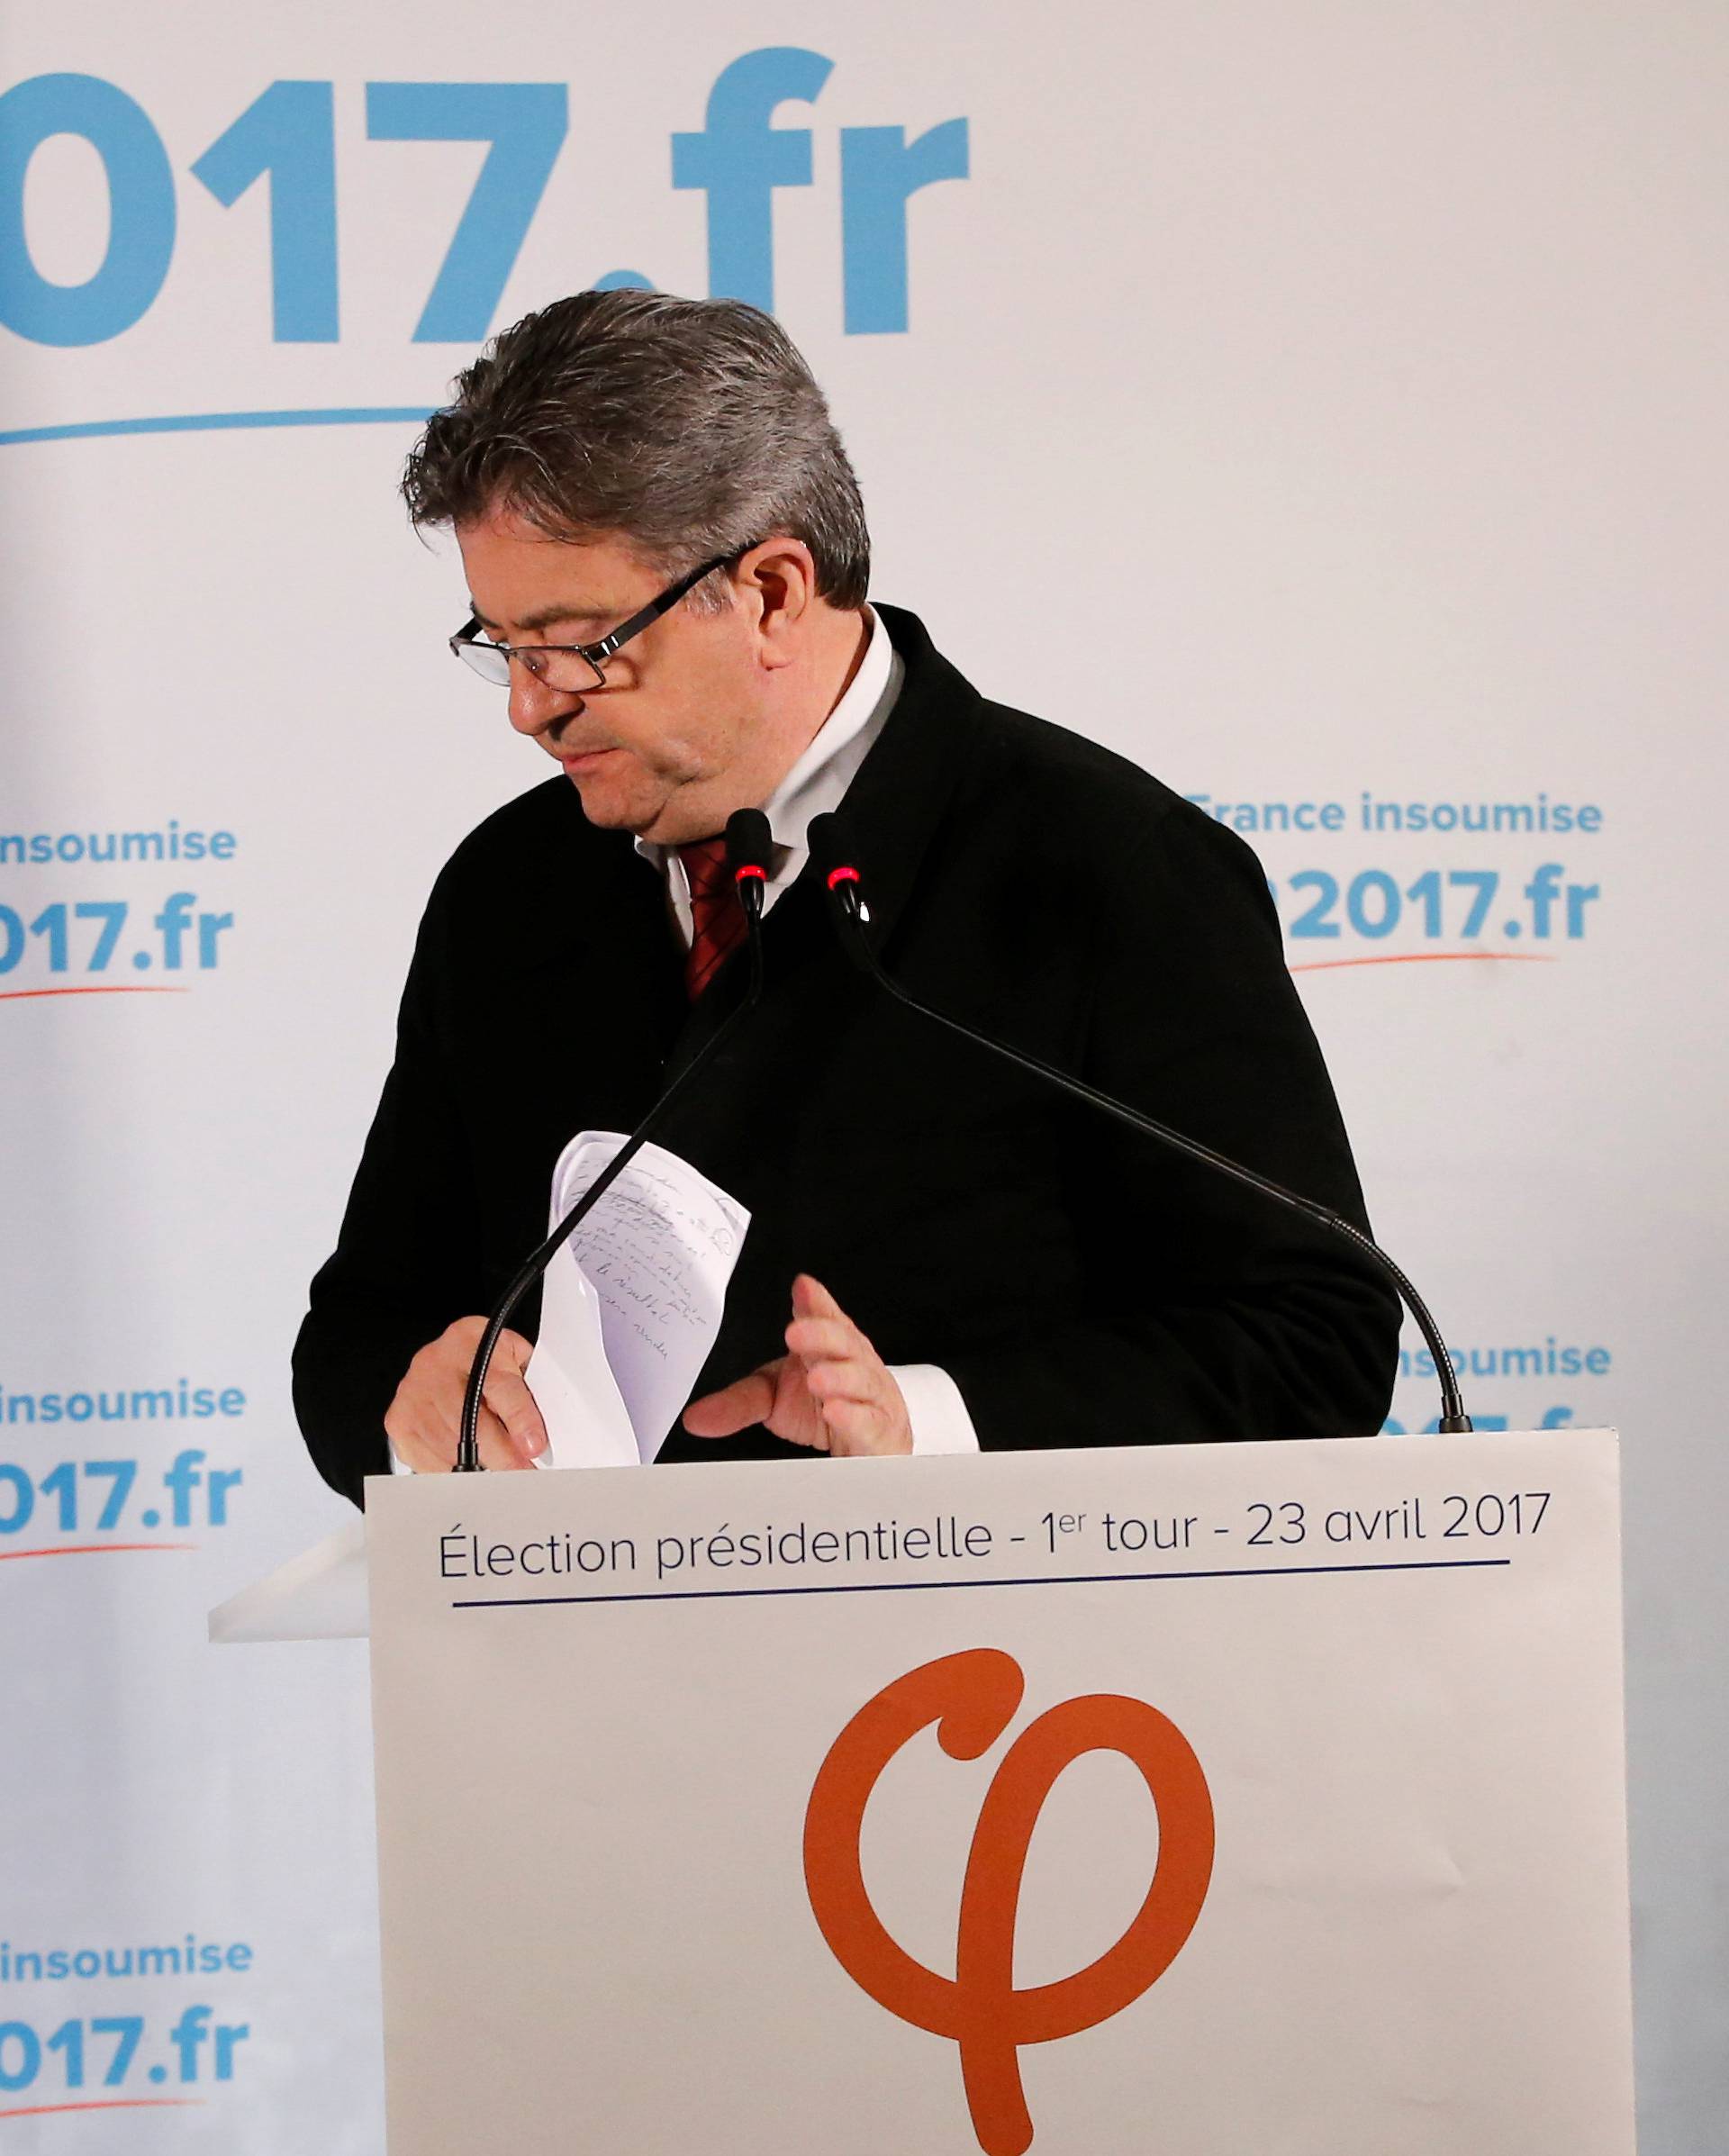 Jean-Luc Melenchon, candidate of the French far-left Parti de Gauche and candidate for the French 2017 presidential election, leaves after delivering a speech in a bar in Paris after early results in the first round of 2017 French presidential election